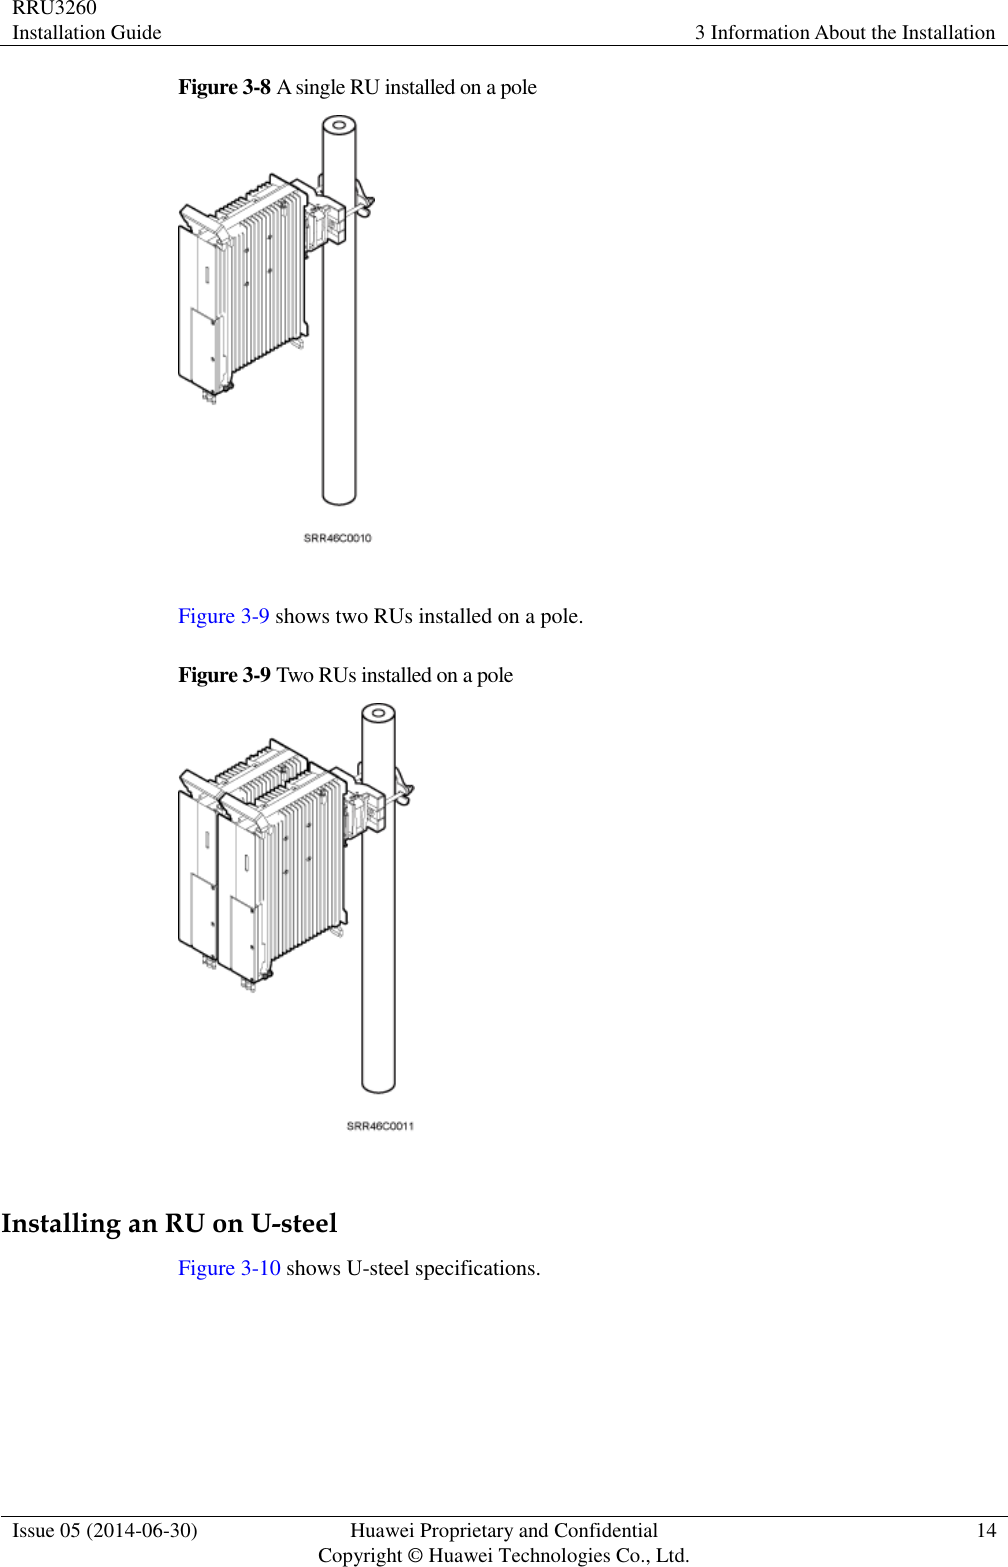 RRU3260 Installation Guide 3 Information About the Installation  Issue 05 (2014-06-30) Huawei Proprietary and Confidential                                     Copyright © Huawei Technologies Co., Ltd. 14  Figure 3-8 A single RU installed on a pole   Figure 3-9 shows two RUs installed on a pole. Figure 3-9 Two RUs installed on a pole   Installing an RU on U-steel Figure 3-10 shows U-steel specifications. 